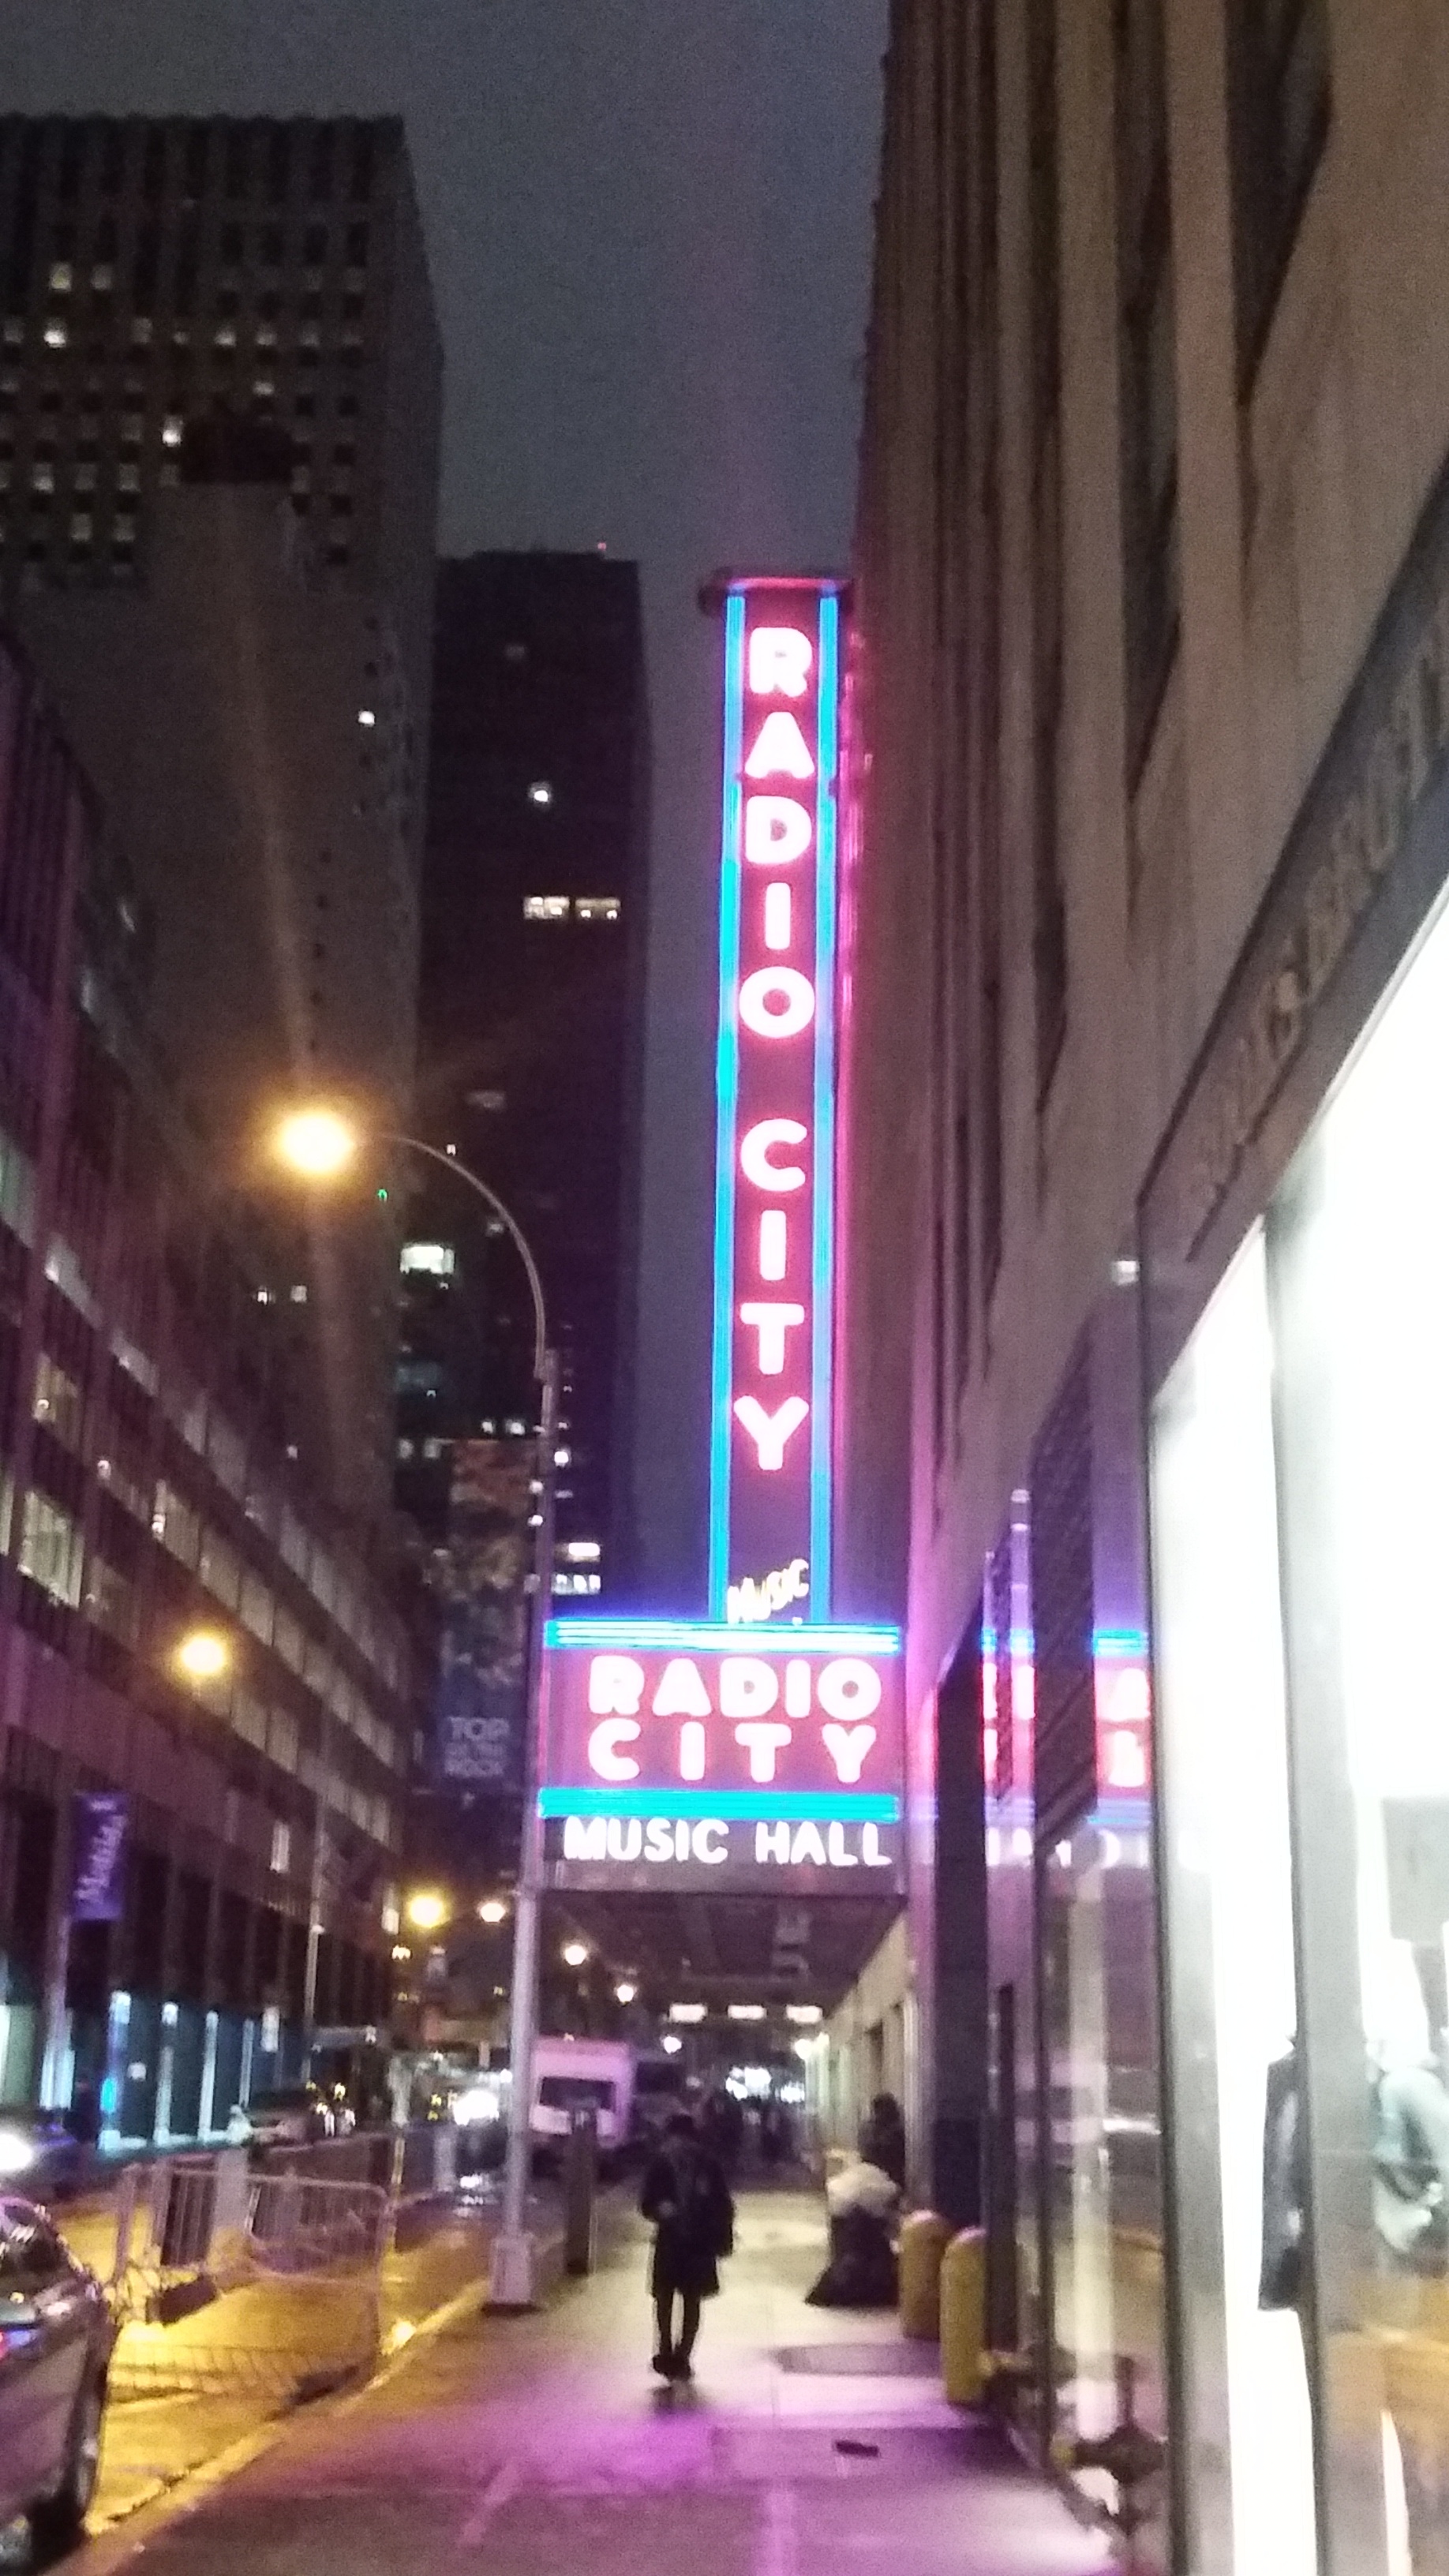  We stayed at a hotel right near Radio City Music Hall. NBC Studios is just a few steps away.&nbsp; 